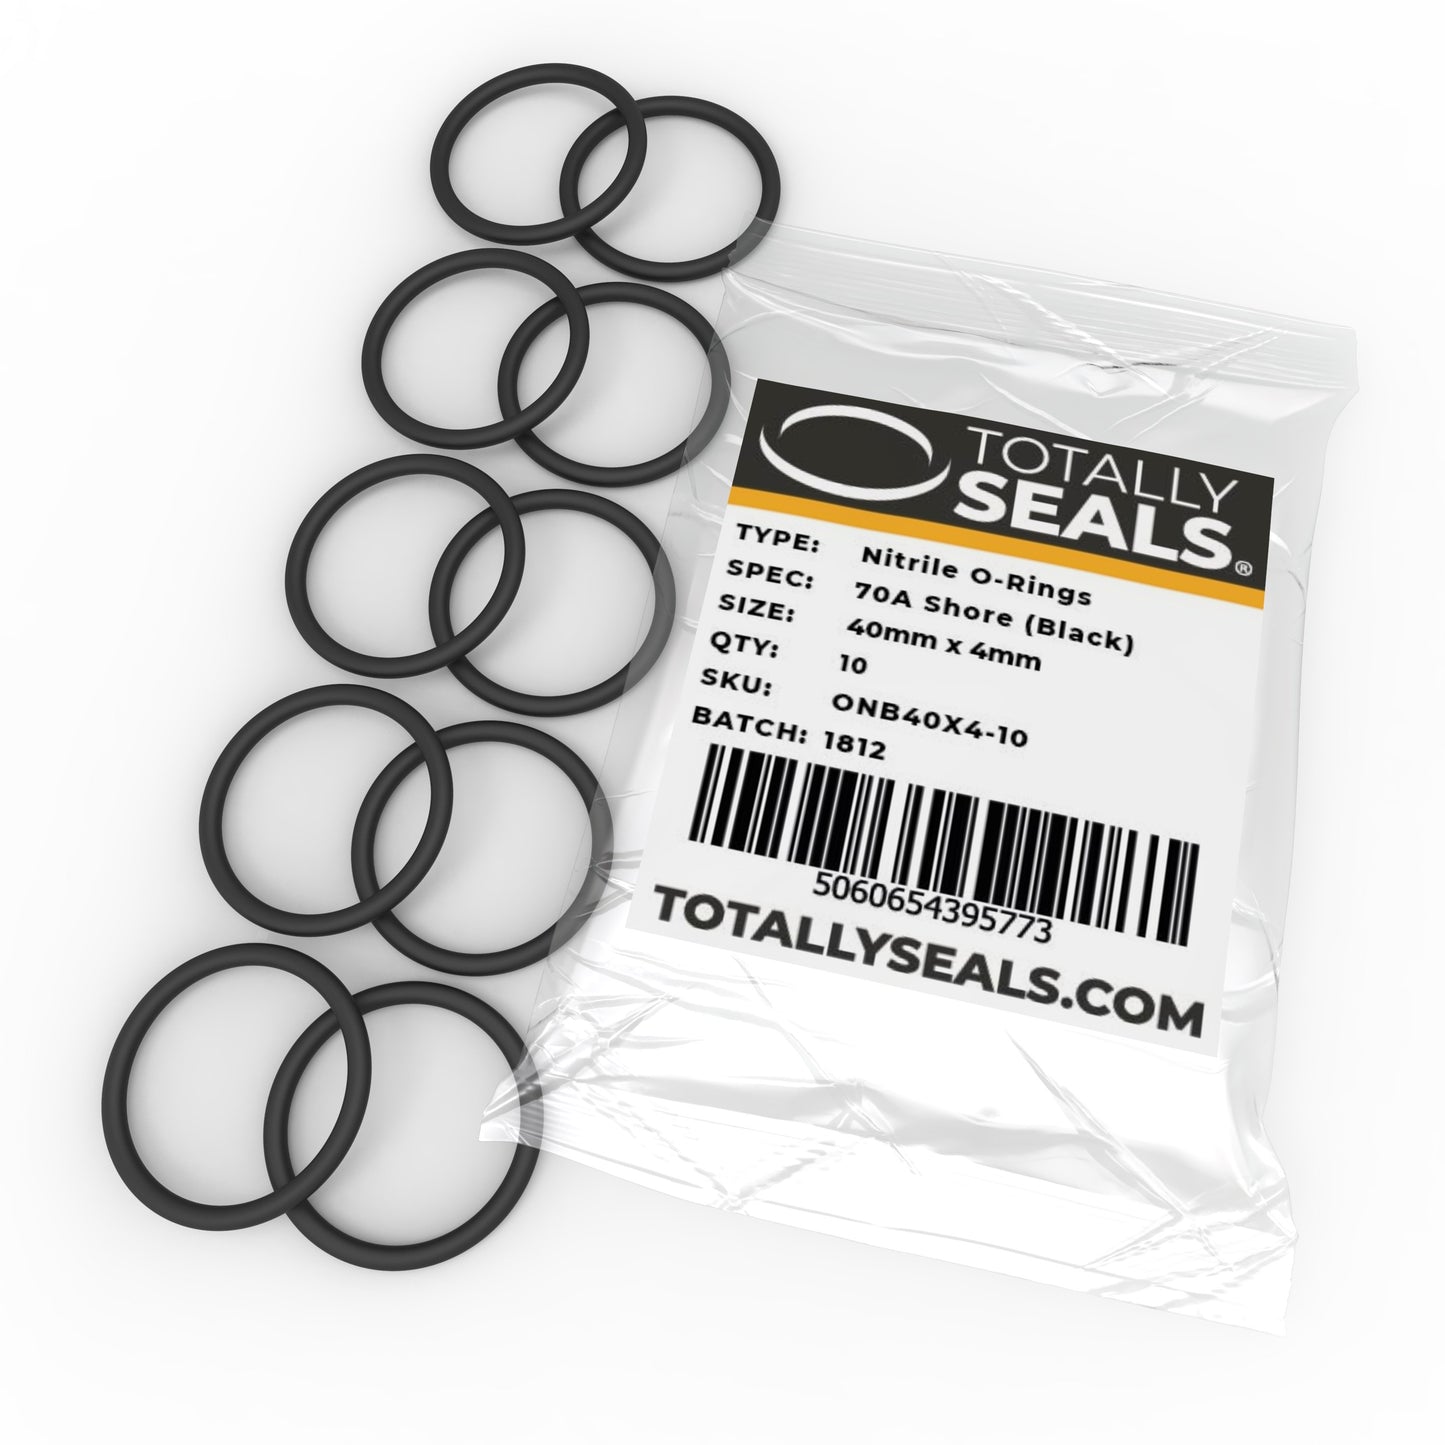 40mm x 4mm (48mm OD) Nitrile O-Rings - Totally Seals®